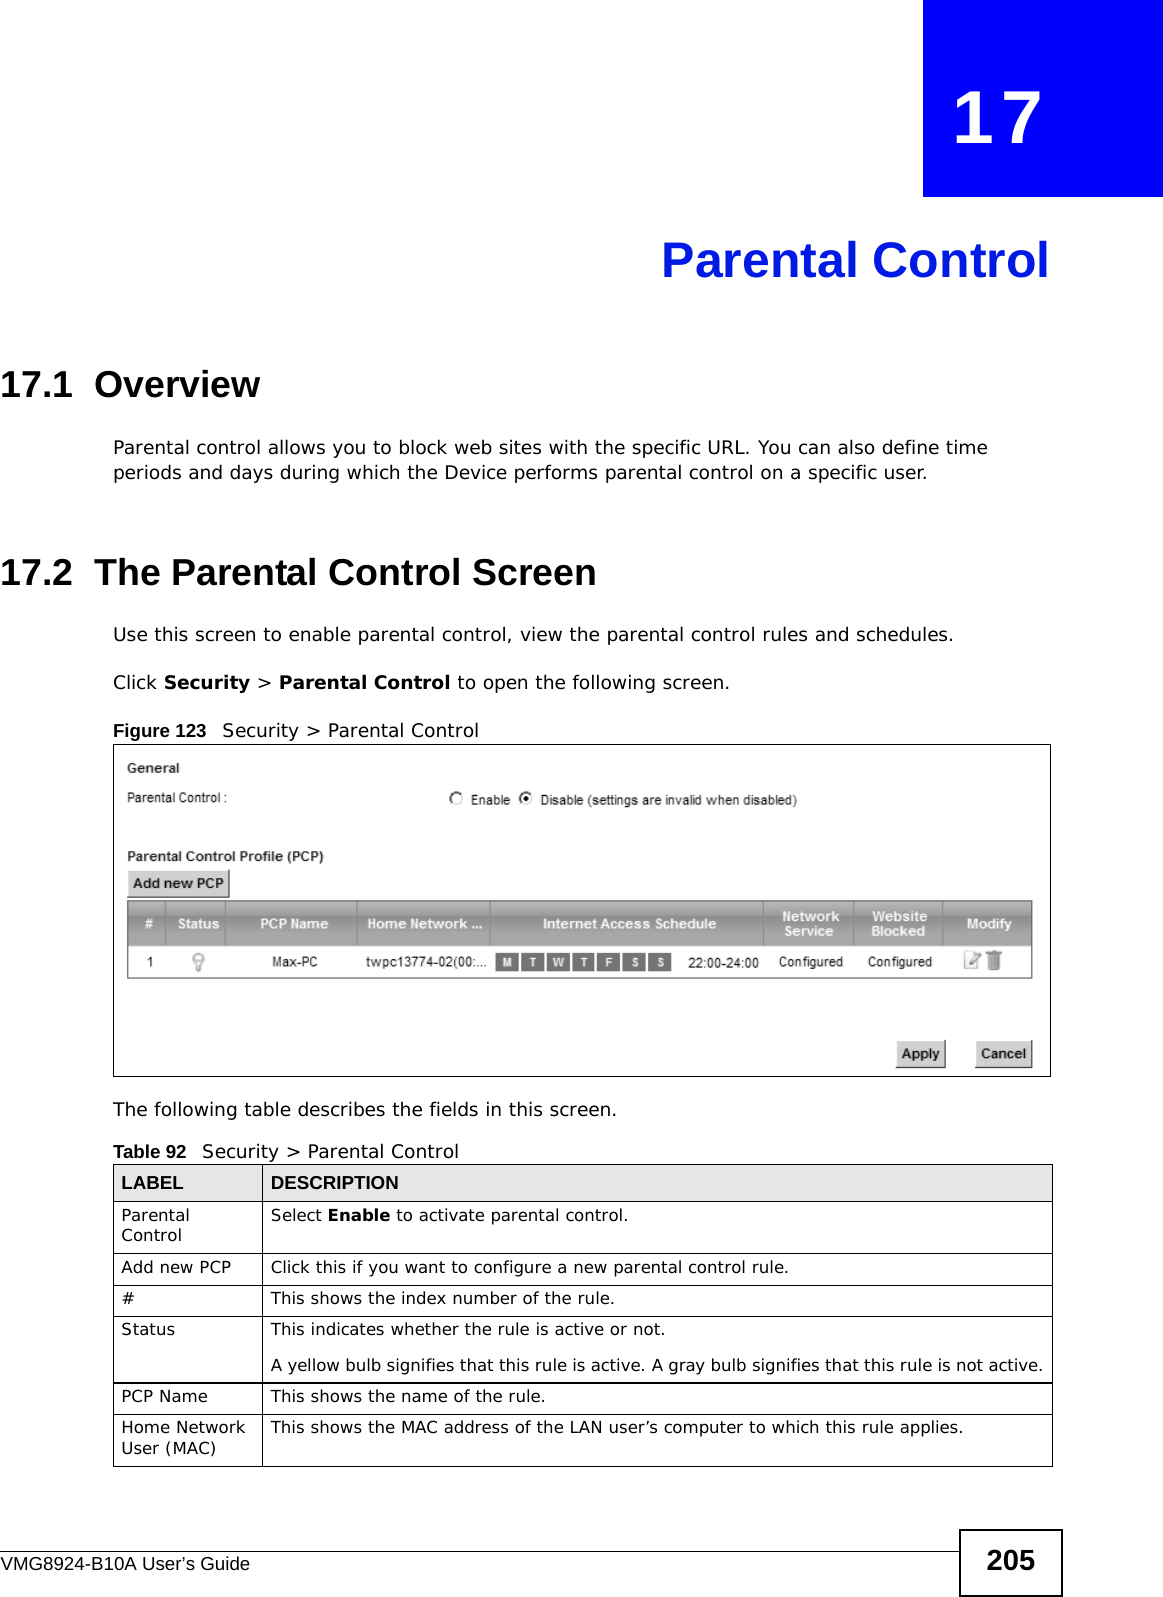 VMG8924-B10A User’s Guide 205CHAPTER   17Parental Control17.1  OverviewParental control allows you to block web sites with the specific URL. You can also define time periods and days during which the Device performs parental control on a specific user. 17.2  The Parental Control ScreenUse this screen to enable parental control, view the parental control rules and schedules.Click Security &gt; Parental Control to open the following screen. Figure 123   Security &gt; Parental Control The following table describes the fields in this screen. Table 92   Security &gt; Parental ControlLABEL DESCRIPTIONParental Control Select Enable to activate parental control.Add new PCP Click this if you want to configure a new parental control rule.#This shows the index number of the rule.Status This indicates whether the rule is active or not.A yellow bulb signifies that this rule is active. A gray bulb signifies that this rule is not active.PCP Name This shows the name of the rule.Home Network User (MAC) This shows the MAC address of the LAN user’s computer to which this rule applies.